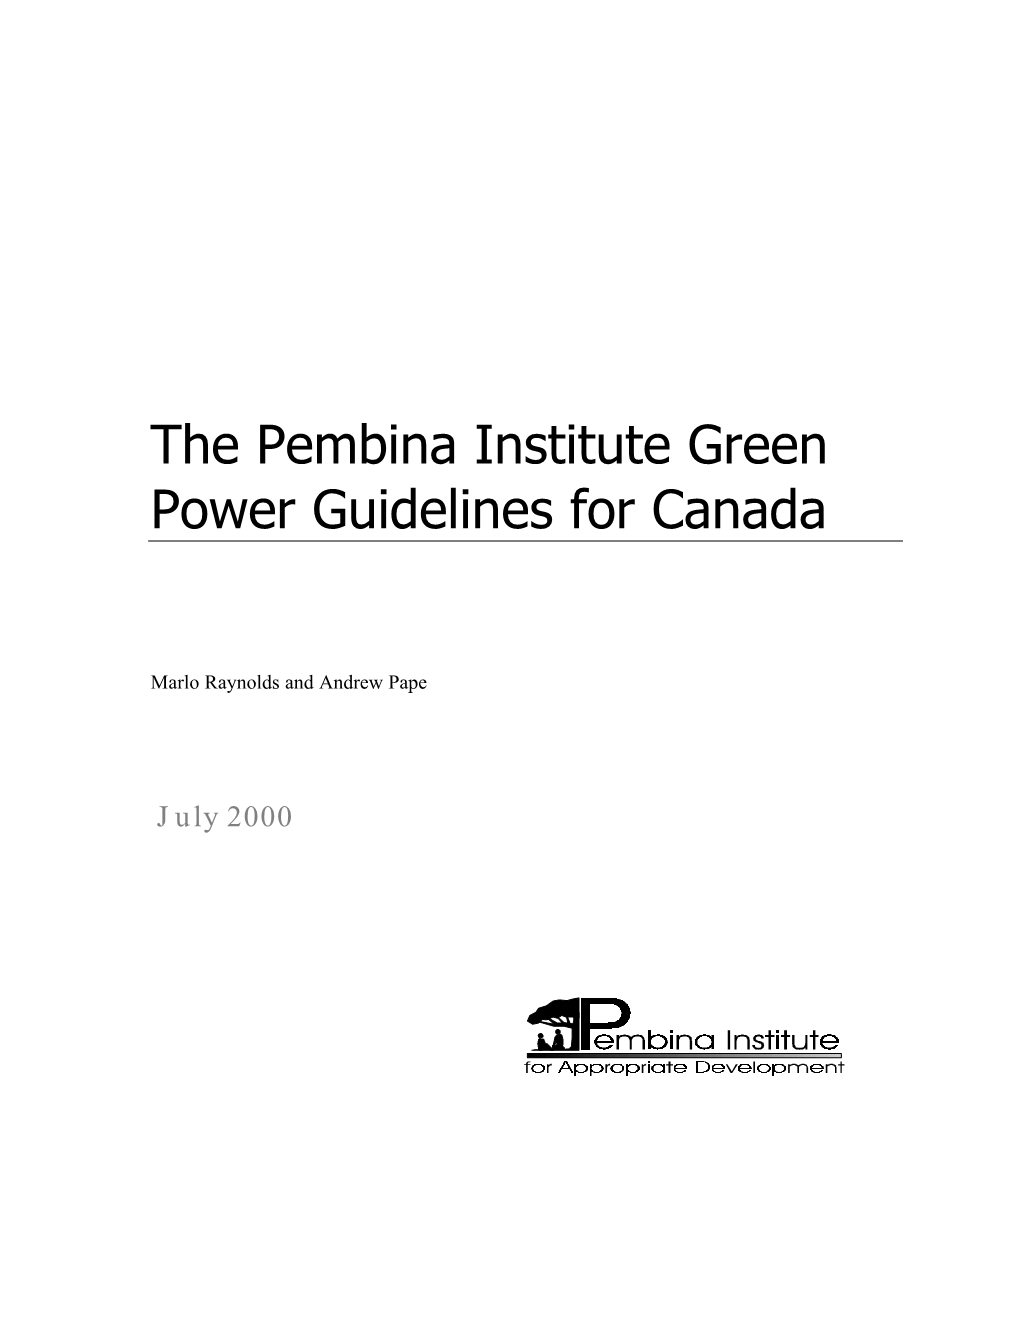 The Pembina Institute Green Power Guidelines for Canada